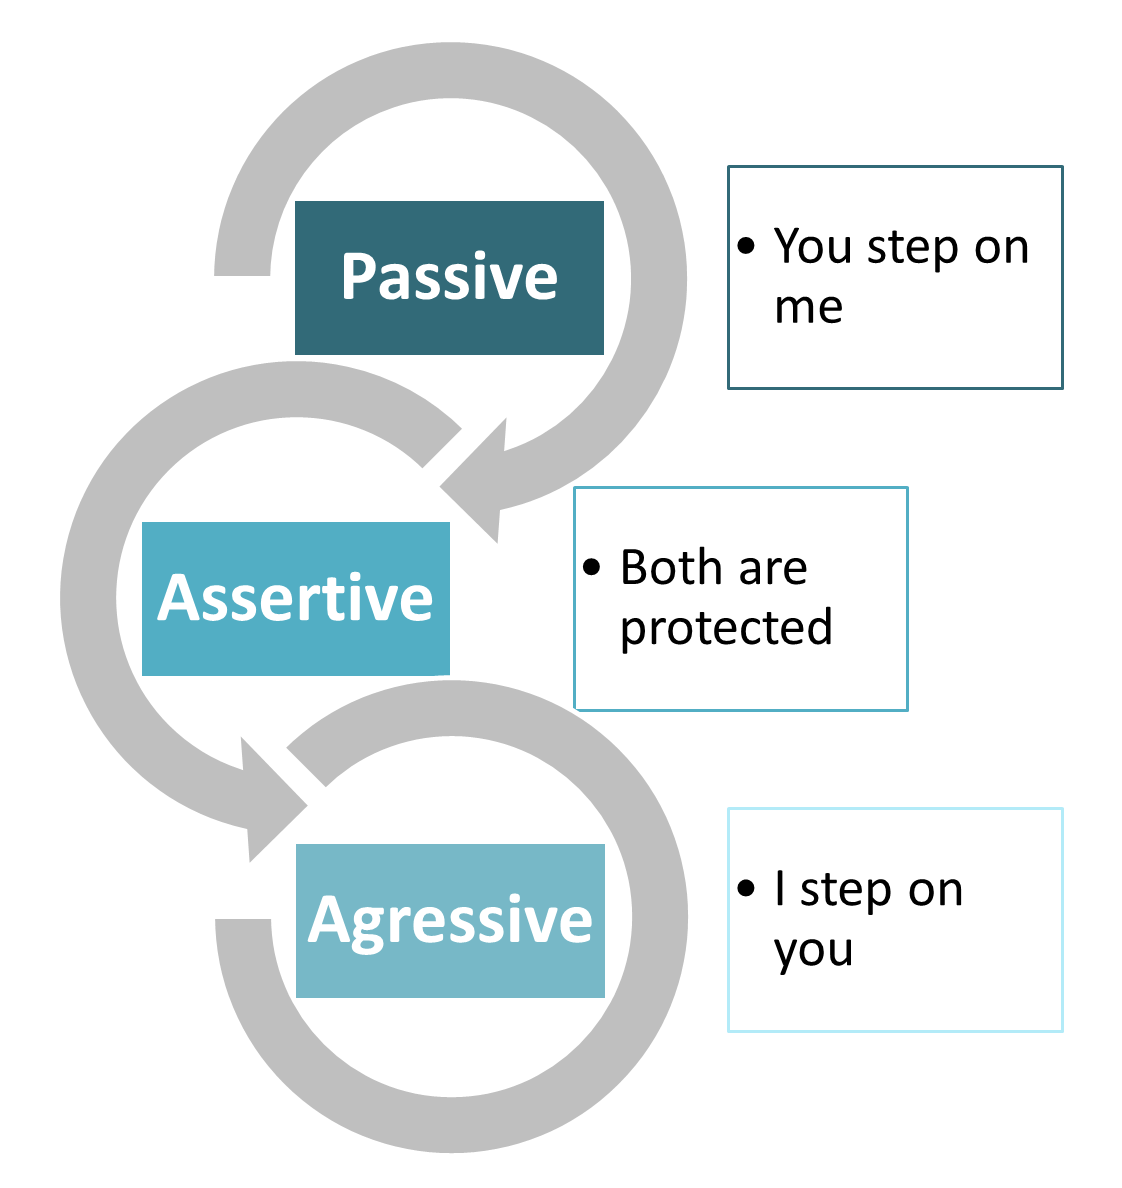 Passive: You step on me; Assertive: Both are protected; Aggressive: I step on you